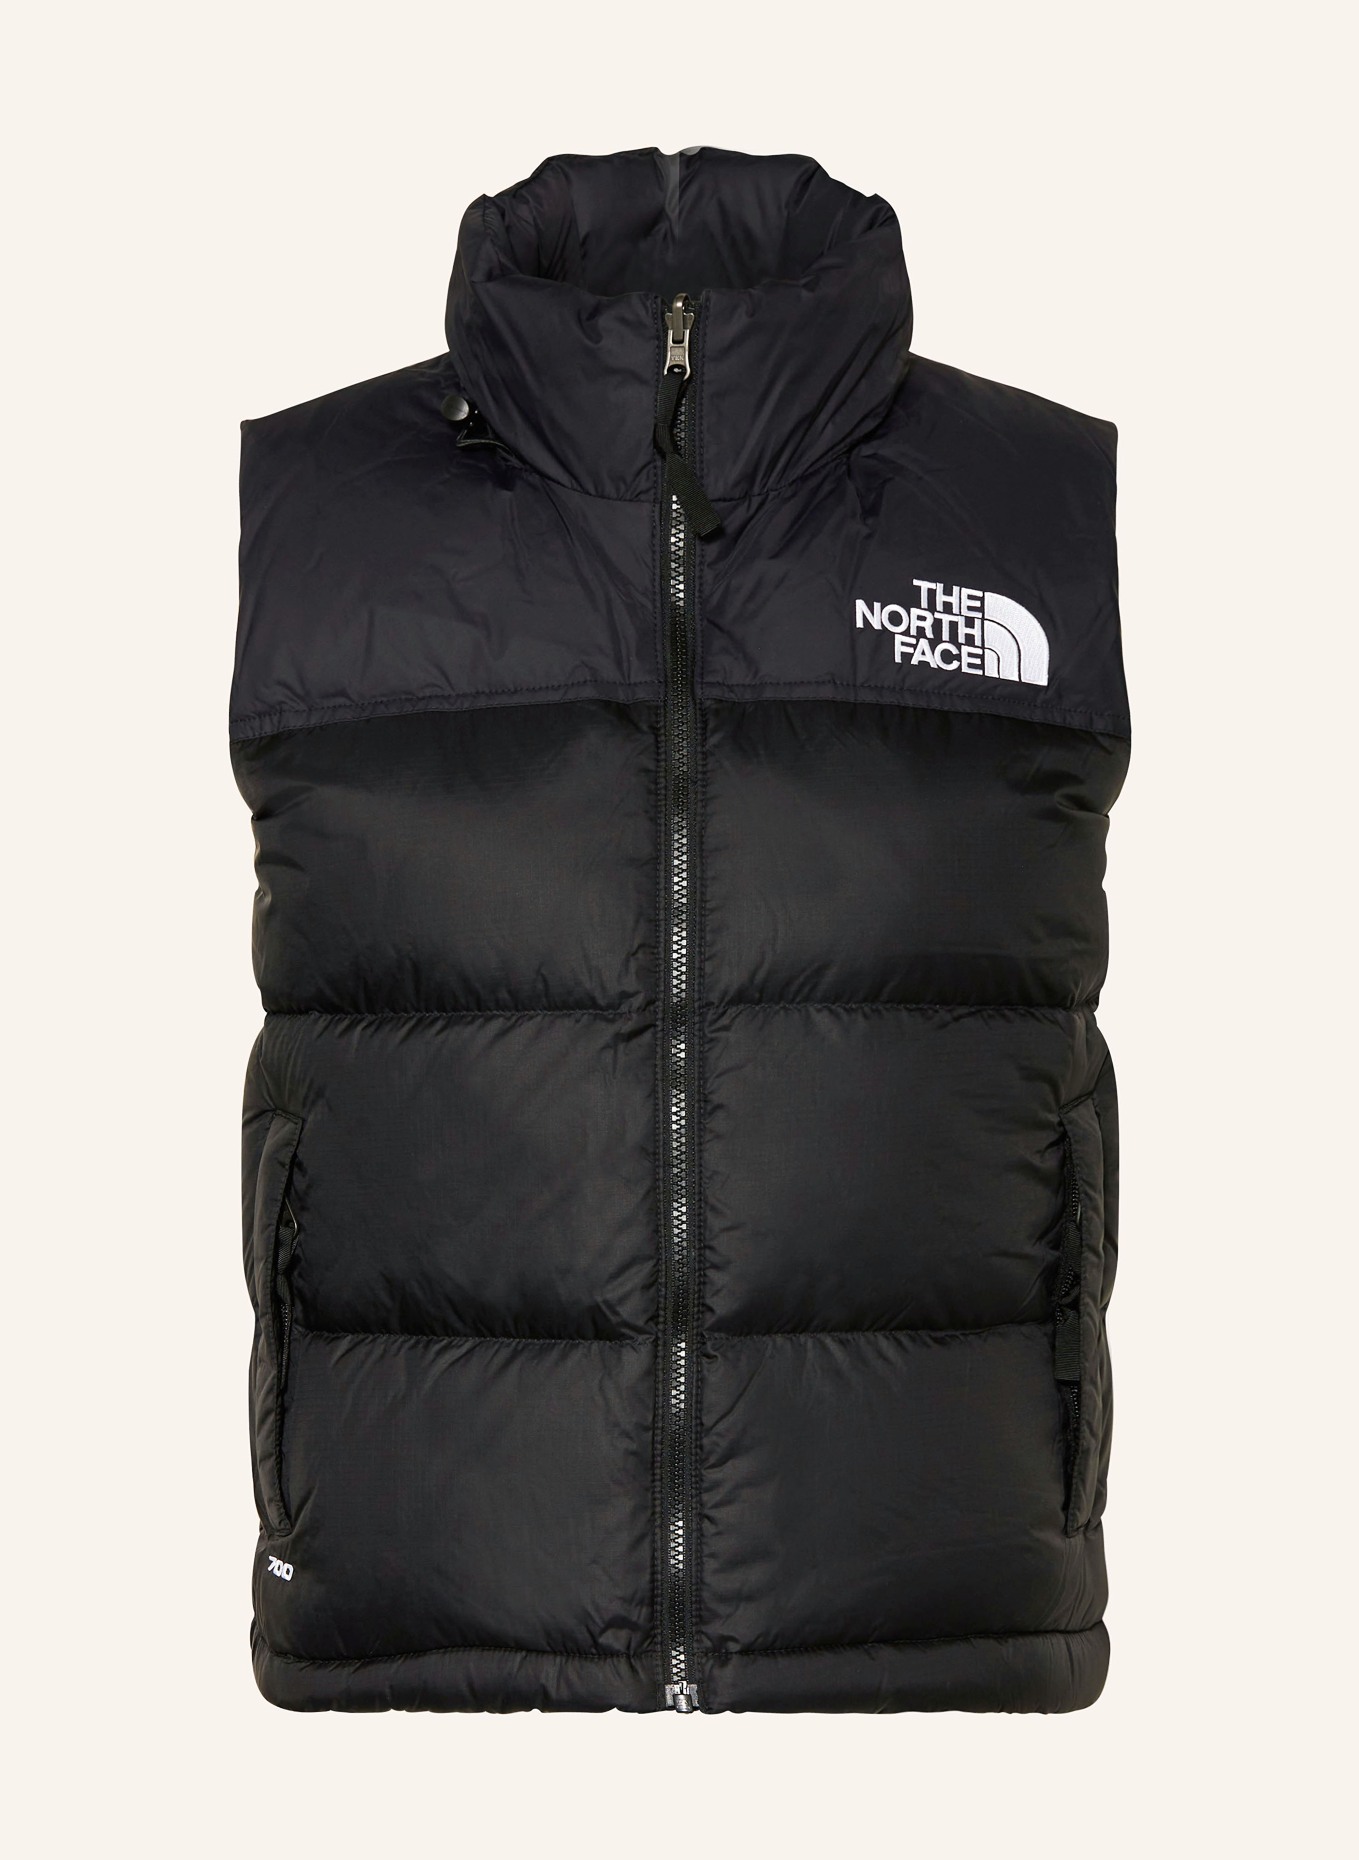 THE NORTH FACE Down vest 1996